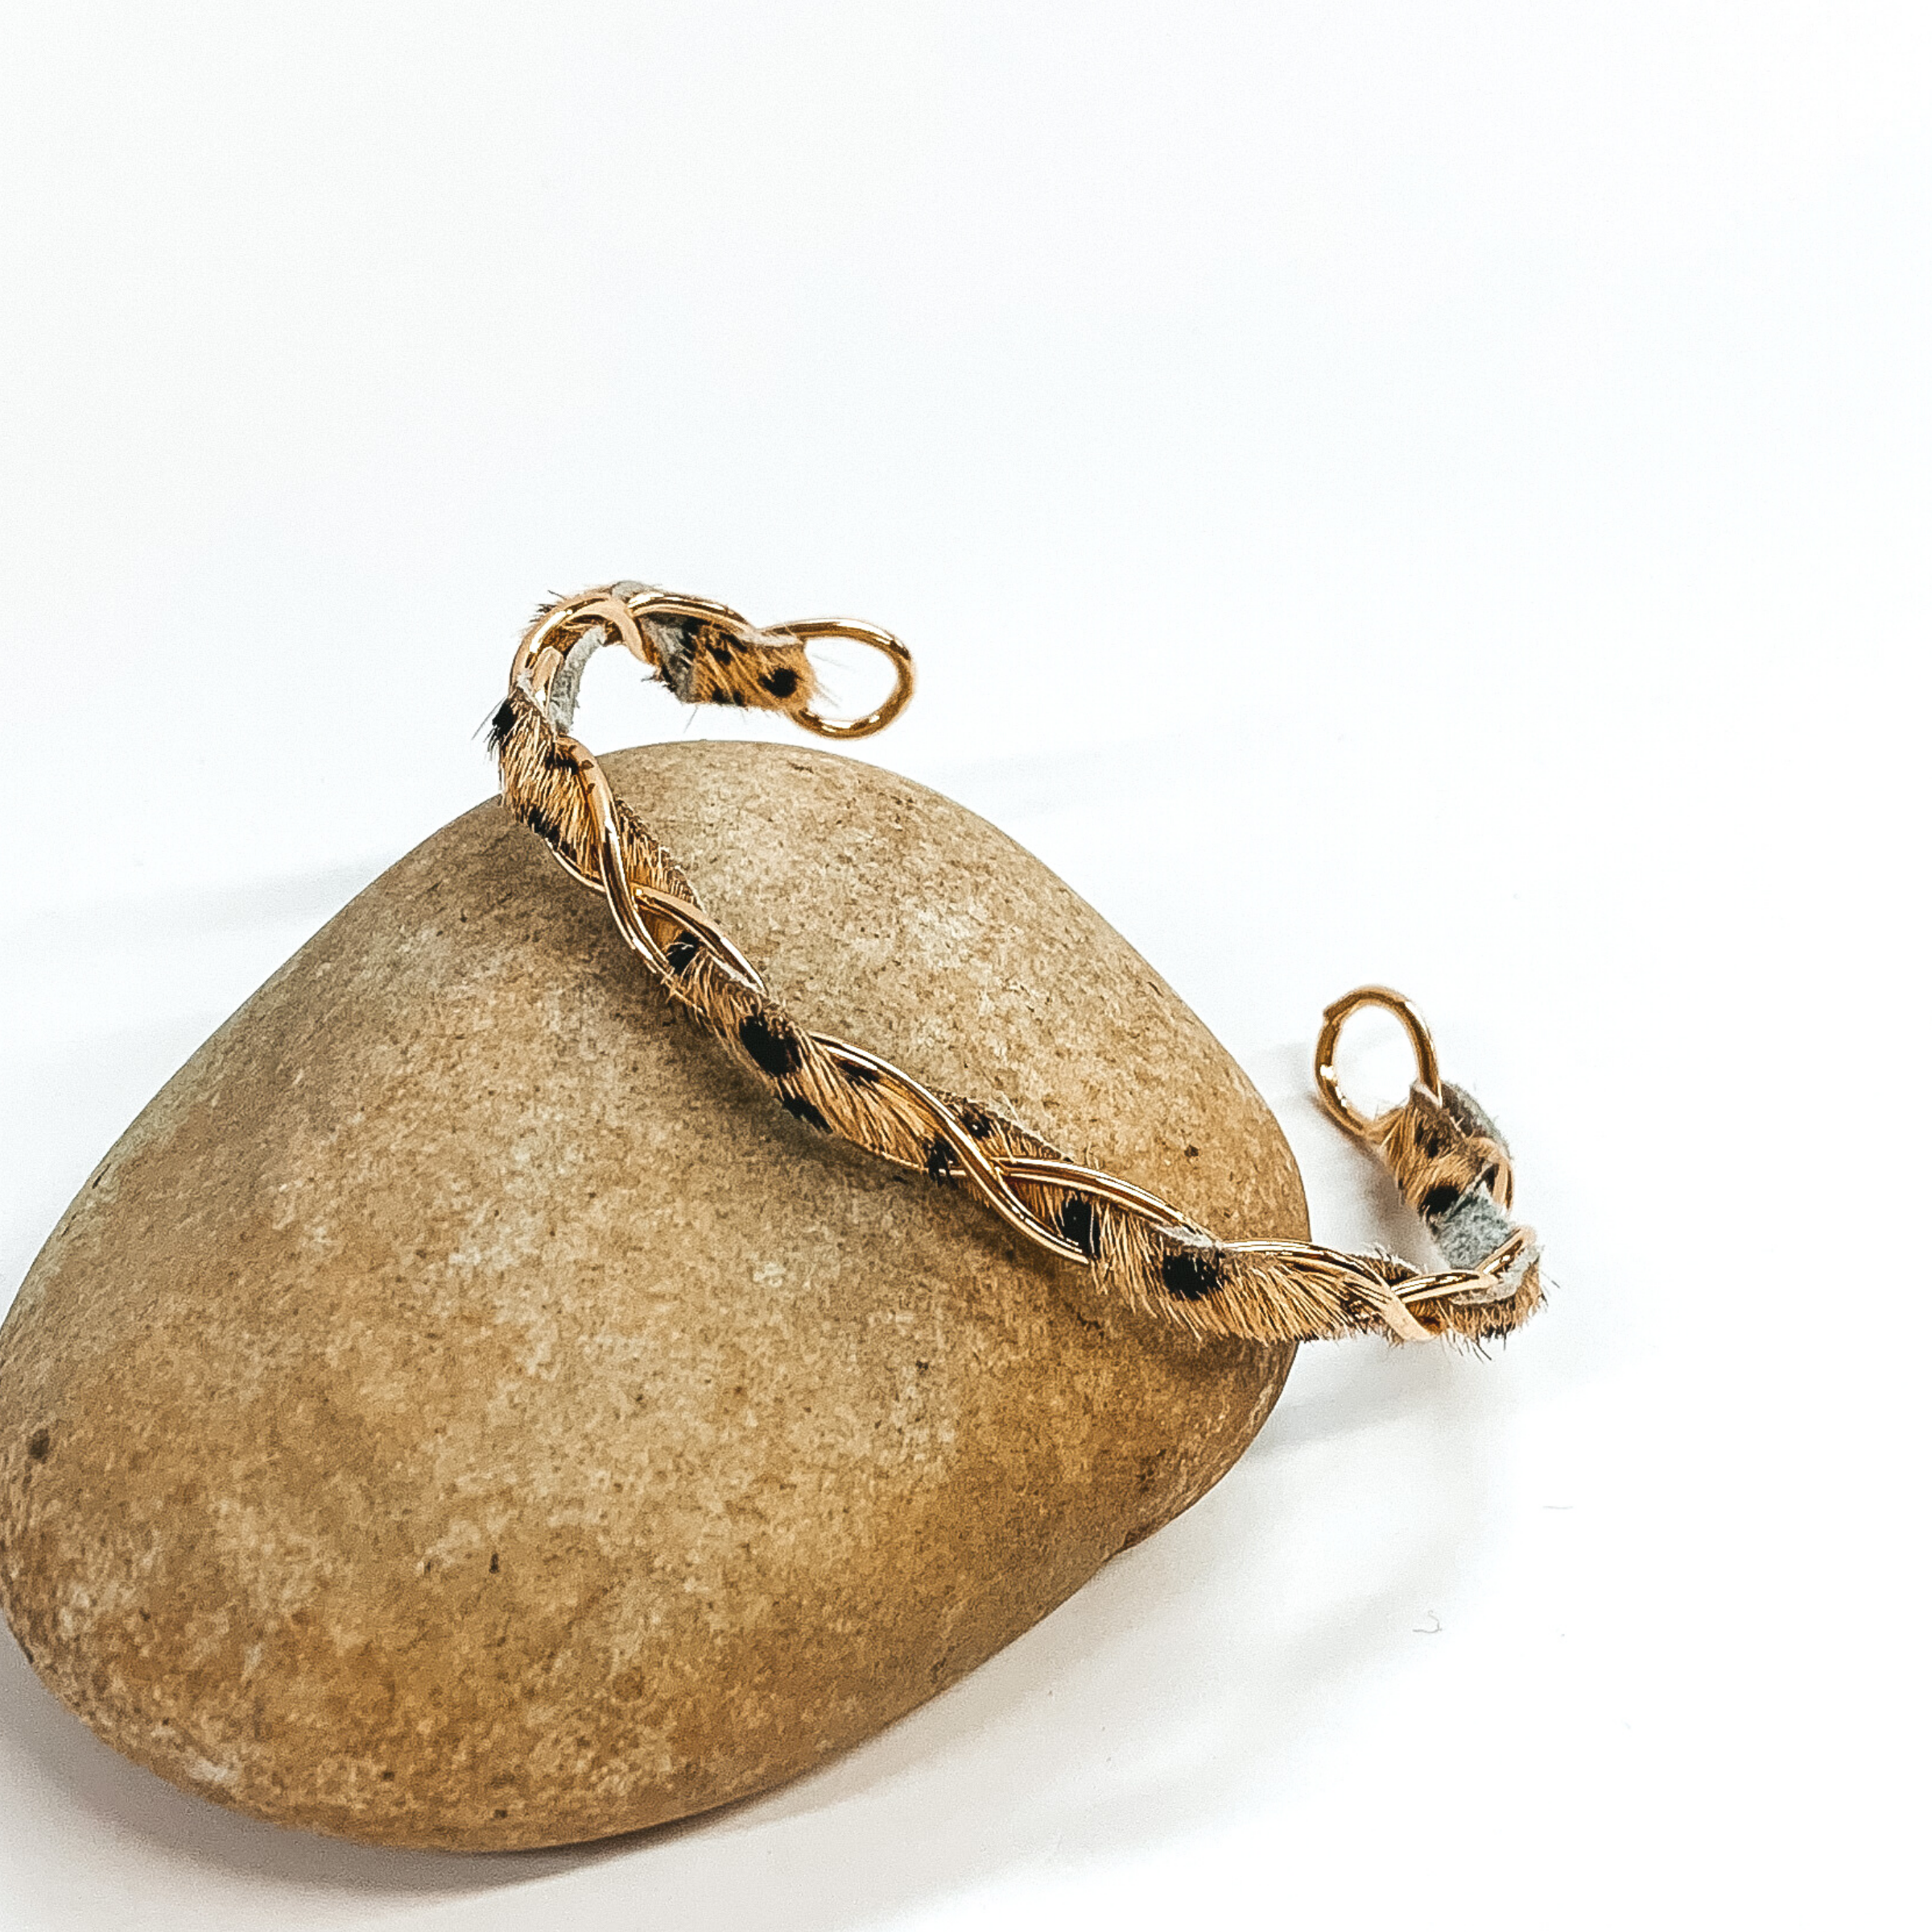 Gold twisted wire bracelet with faux fur inlay in a tan dalmatian print. This bracelet is pictured laying against a rock on a white background.